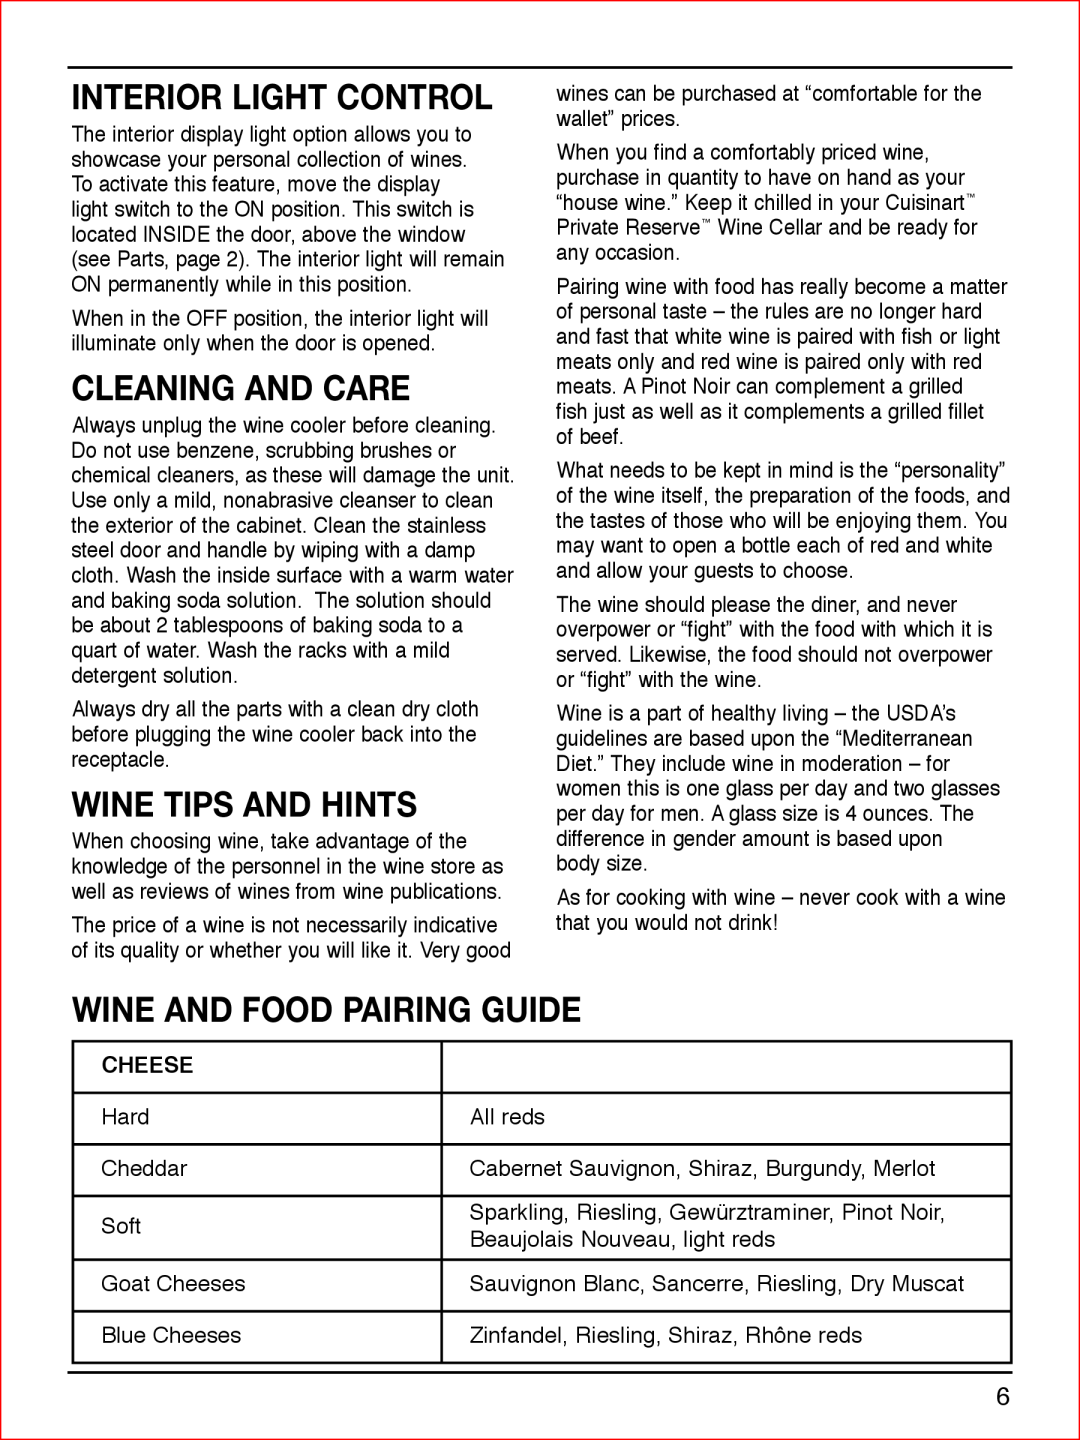 Cuisinart CWC-900 Interior Light Control, Cleaning And Care, Wine Tips And Hints, Wine And Food Pairing Guide, Cheese 